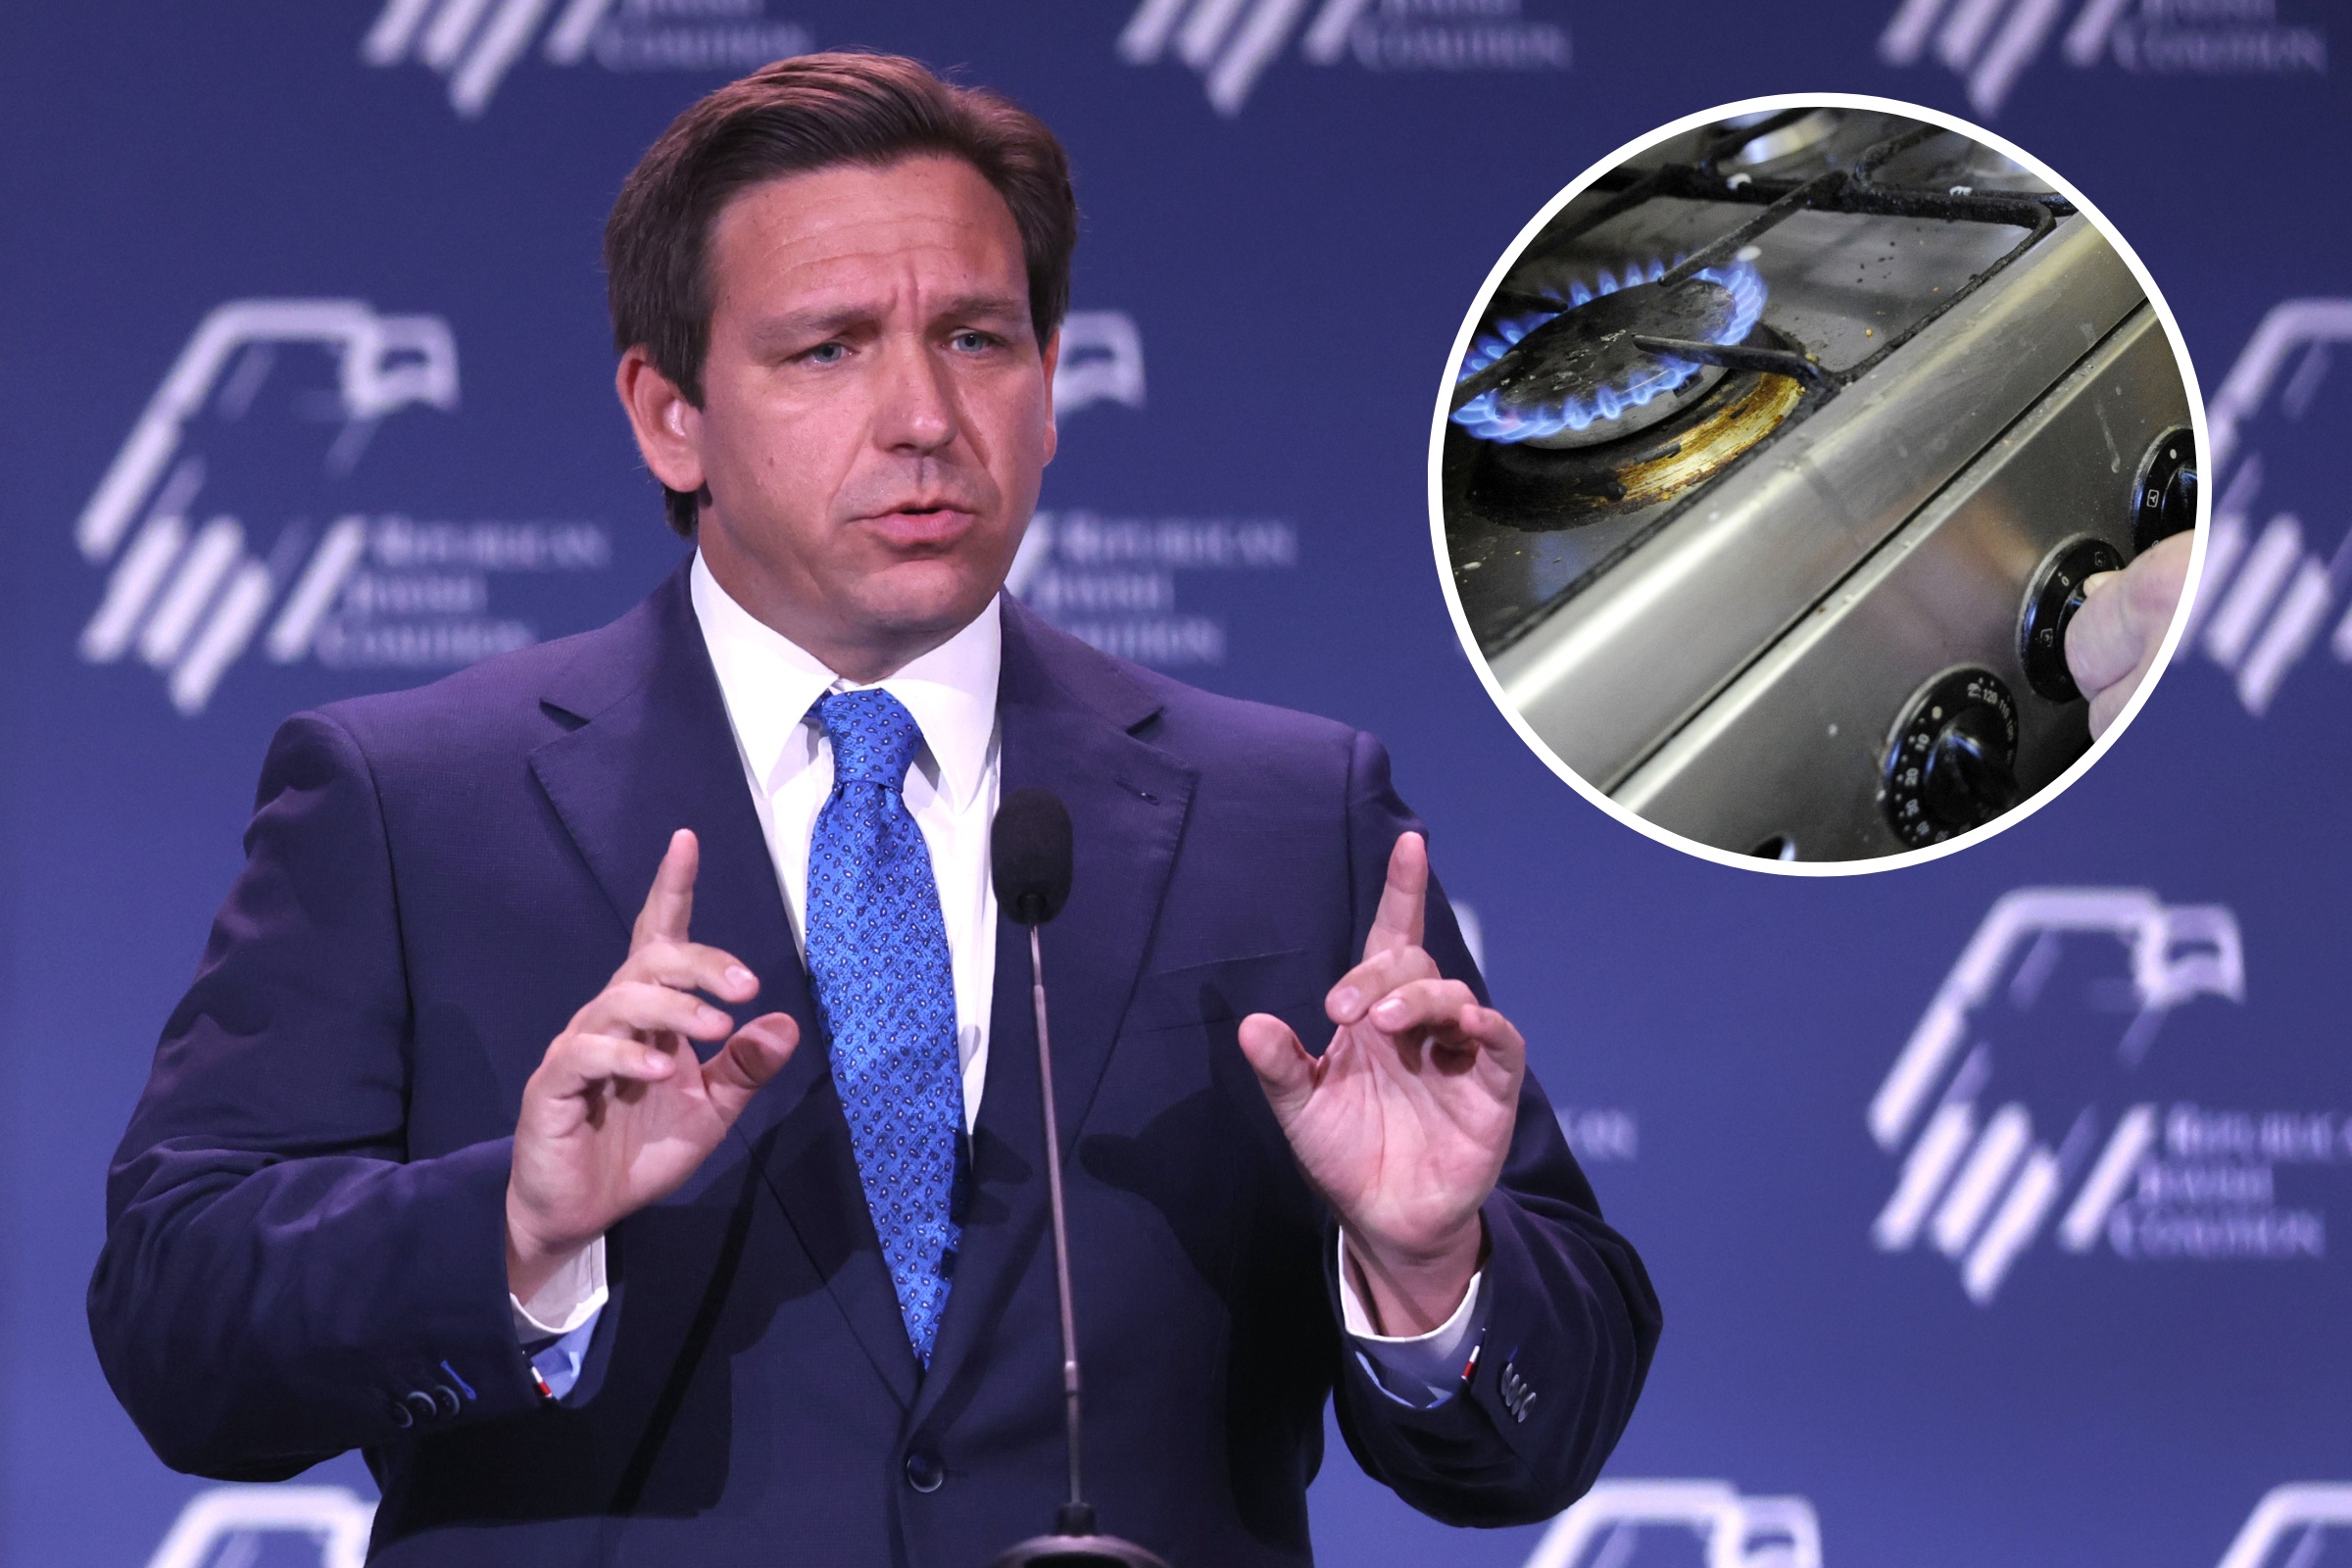 DeSantis Ripped for Proposing Tax Break on Gas Stoves 'They' Want to Take